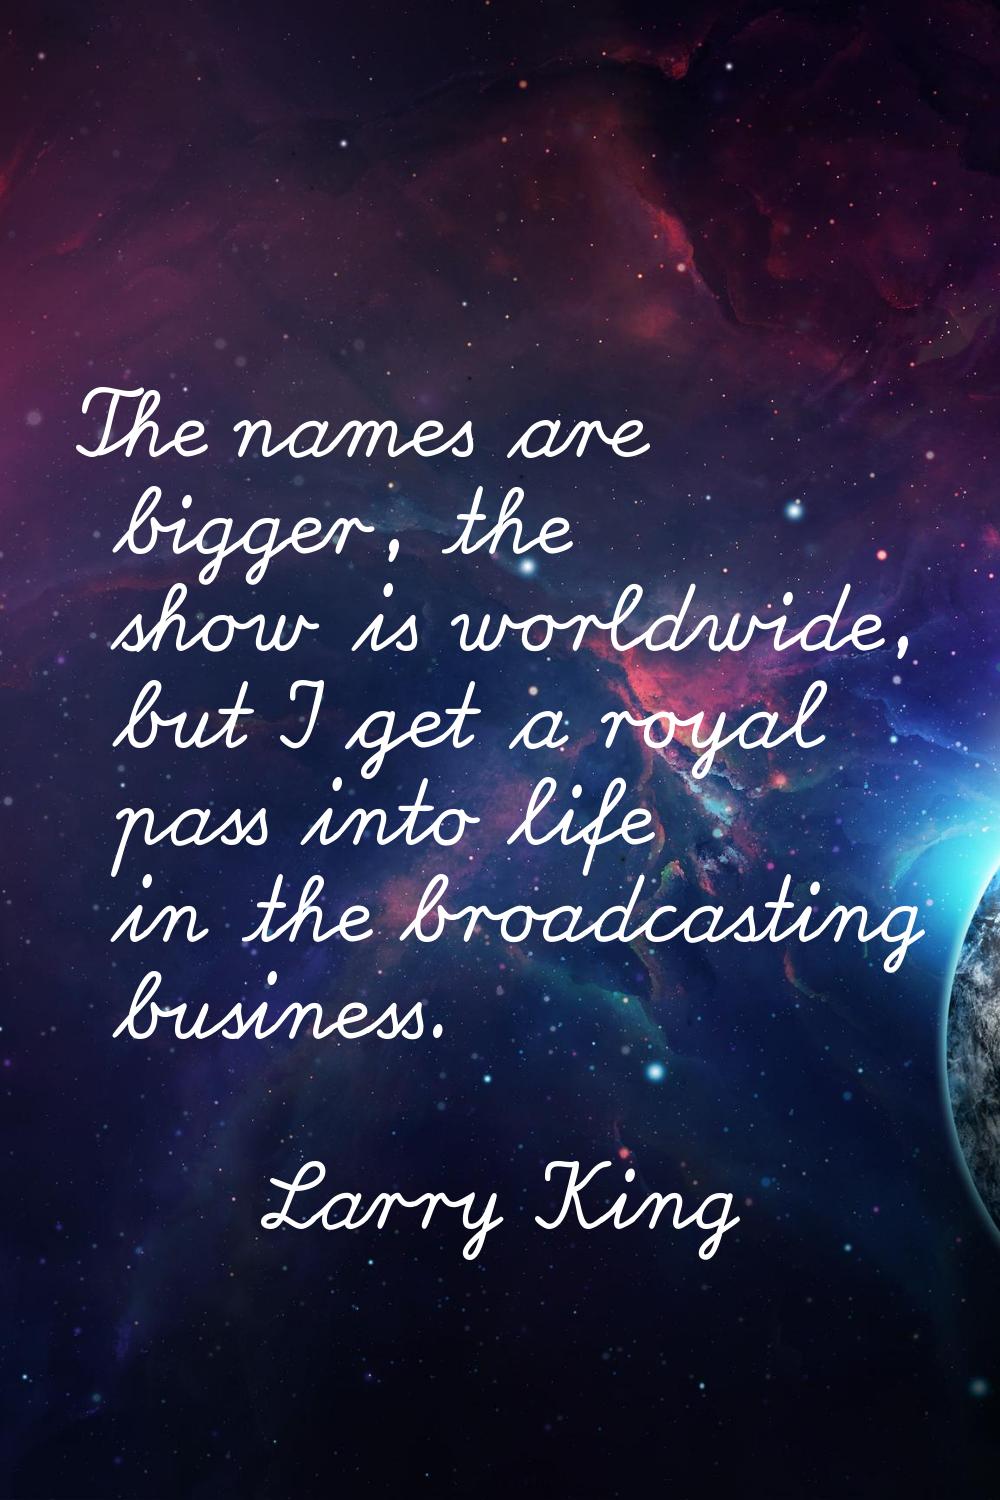 The names are bigger, the show is worldwide, but I get a royal pass into life in the broadcasting b